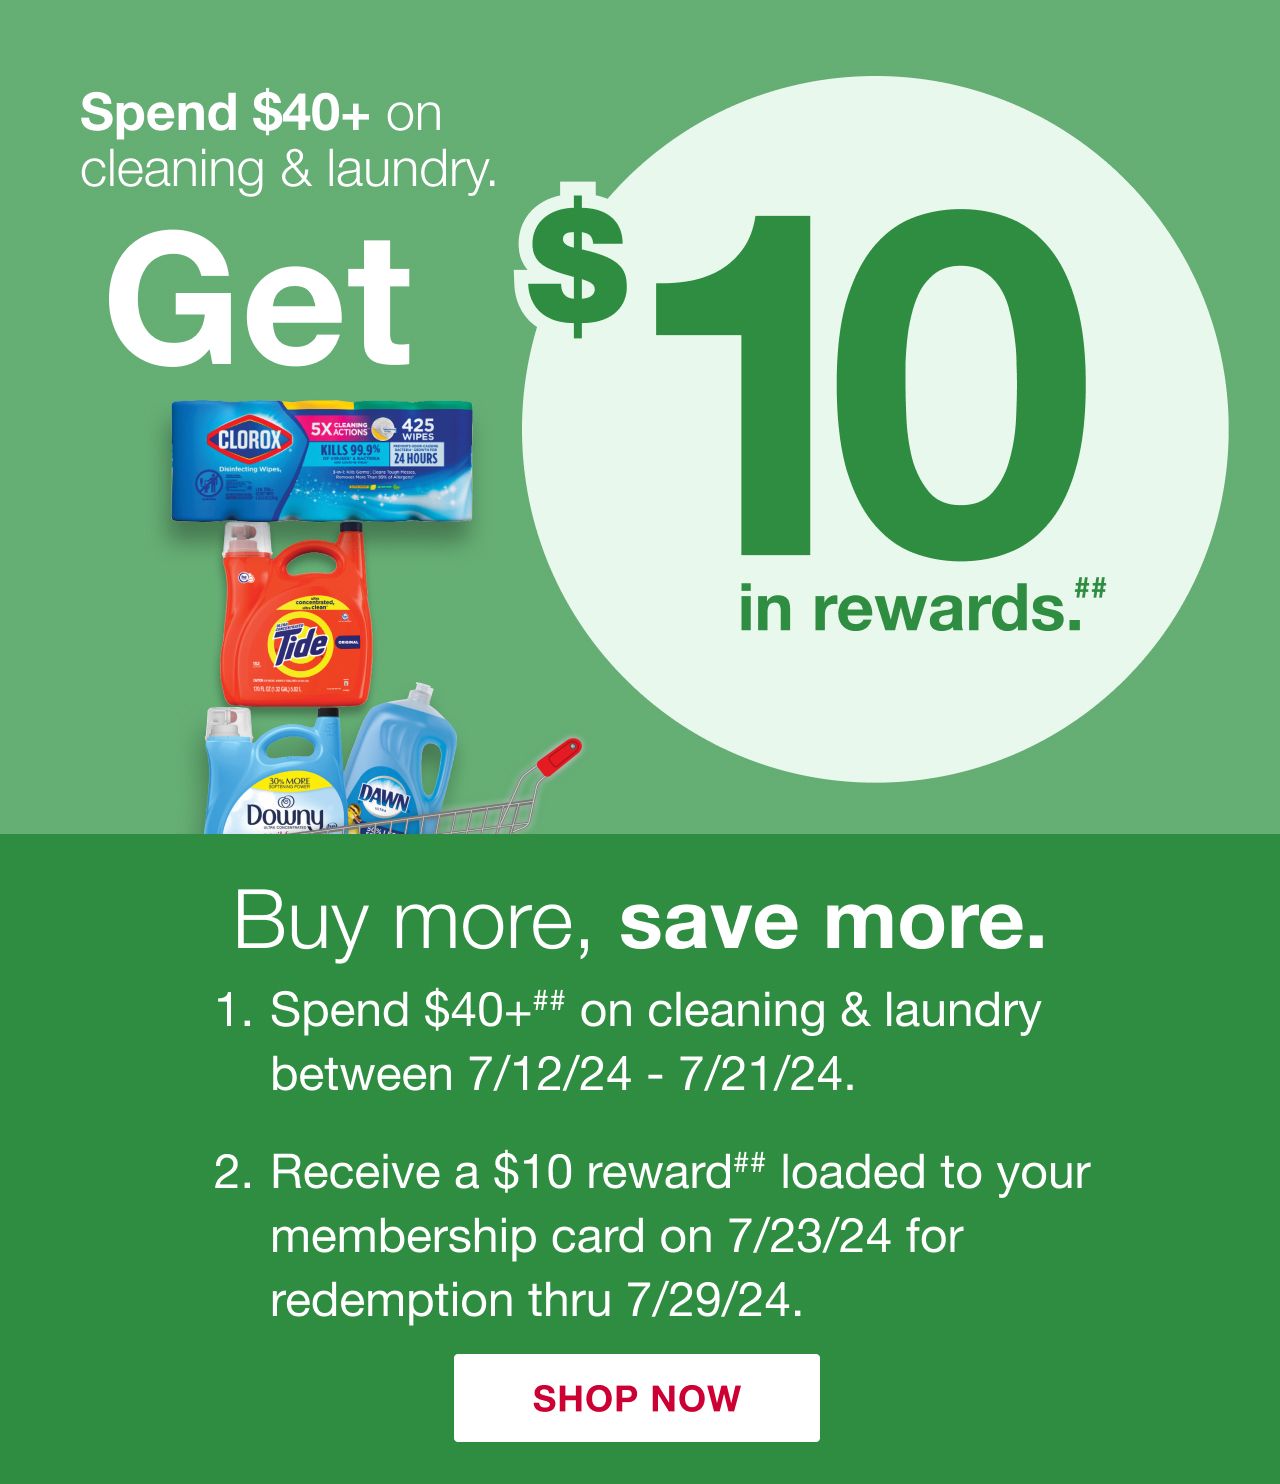 Buy more, save more. Step 1. Spend $40 or more on cleaning and laundry between 7/12 and 7/21. Step 2. Receive a $10 reward loaded to your membership card on 7/23 for redemption through 7/29.